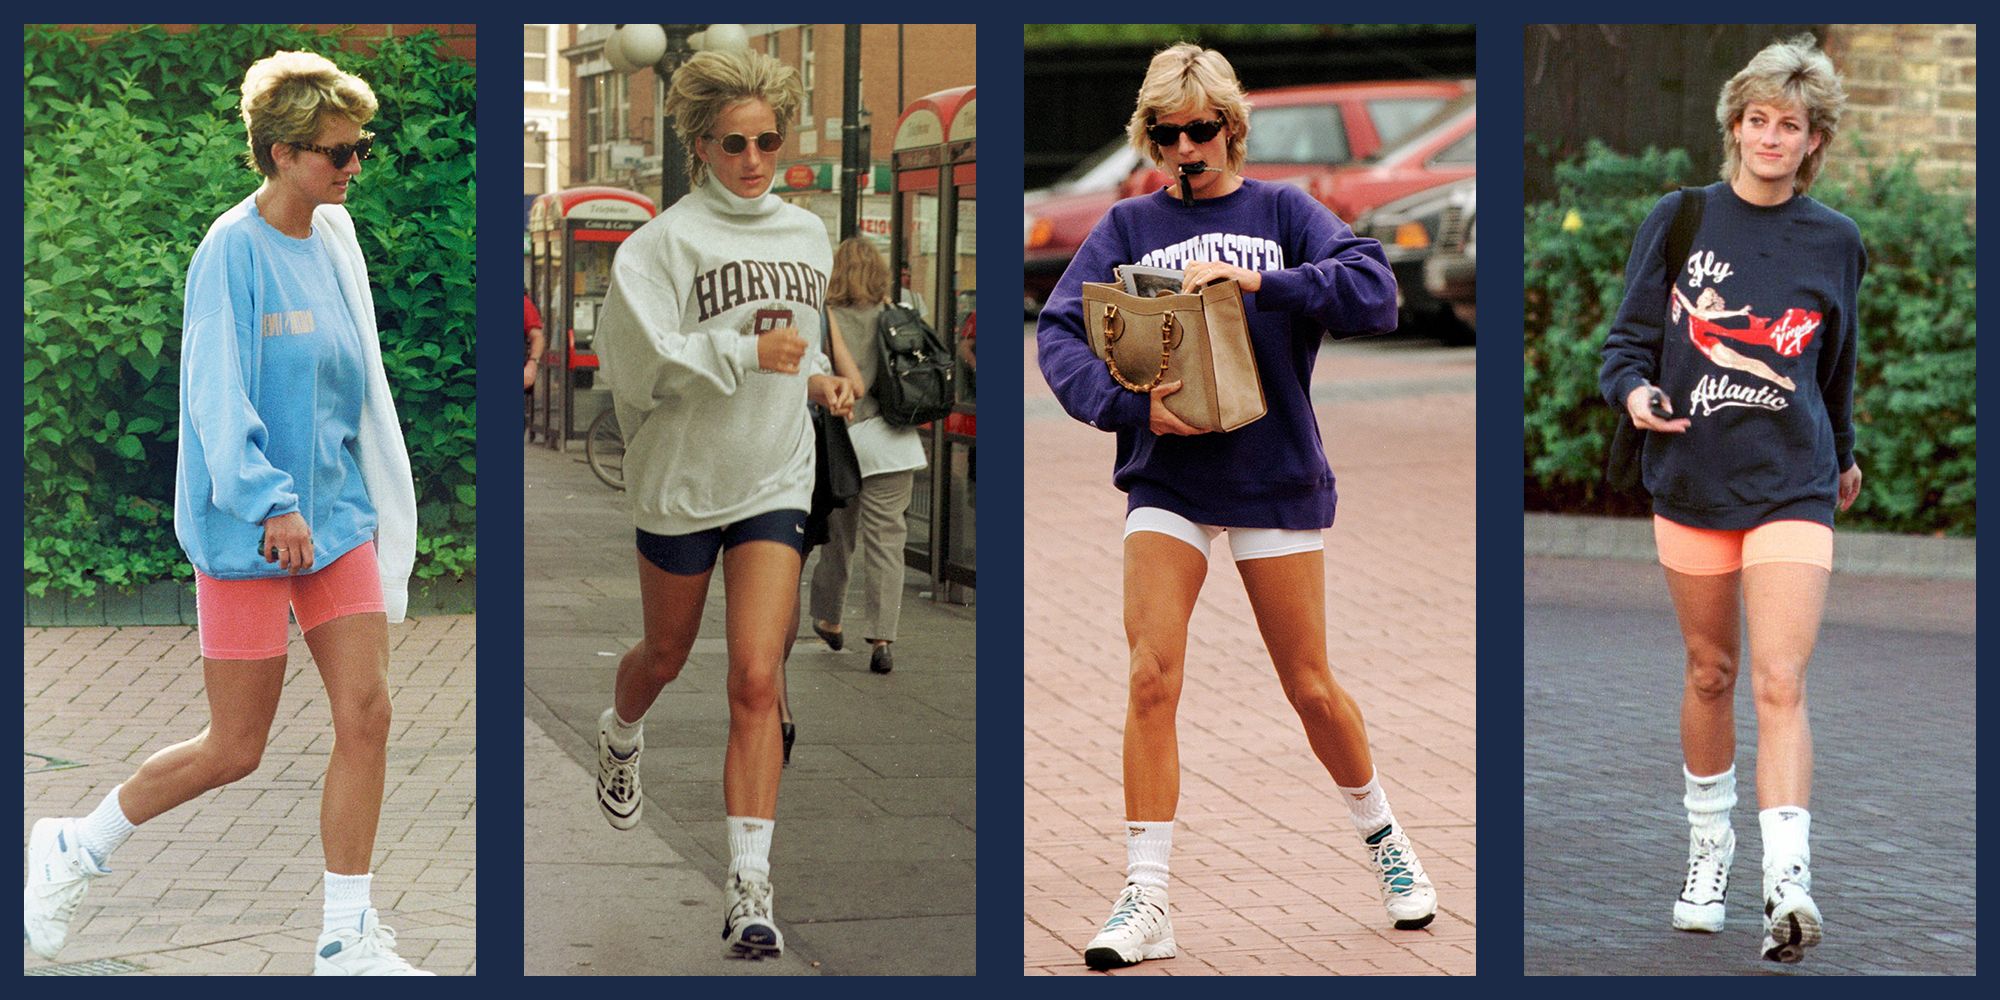 Recreate Princess Diana Biker Shorts and Sweatshirts Outfits- HOW TO GET READY FOR RETRO THEME